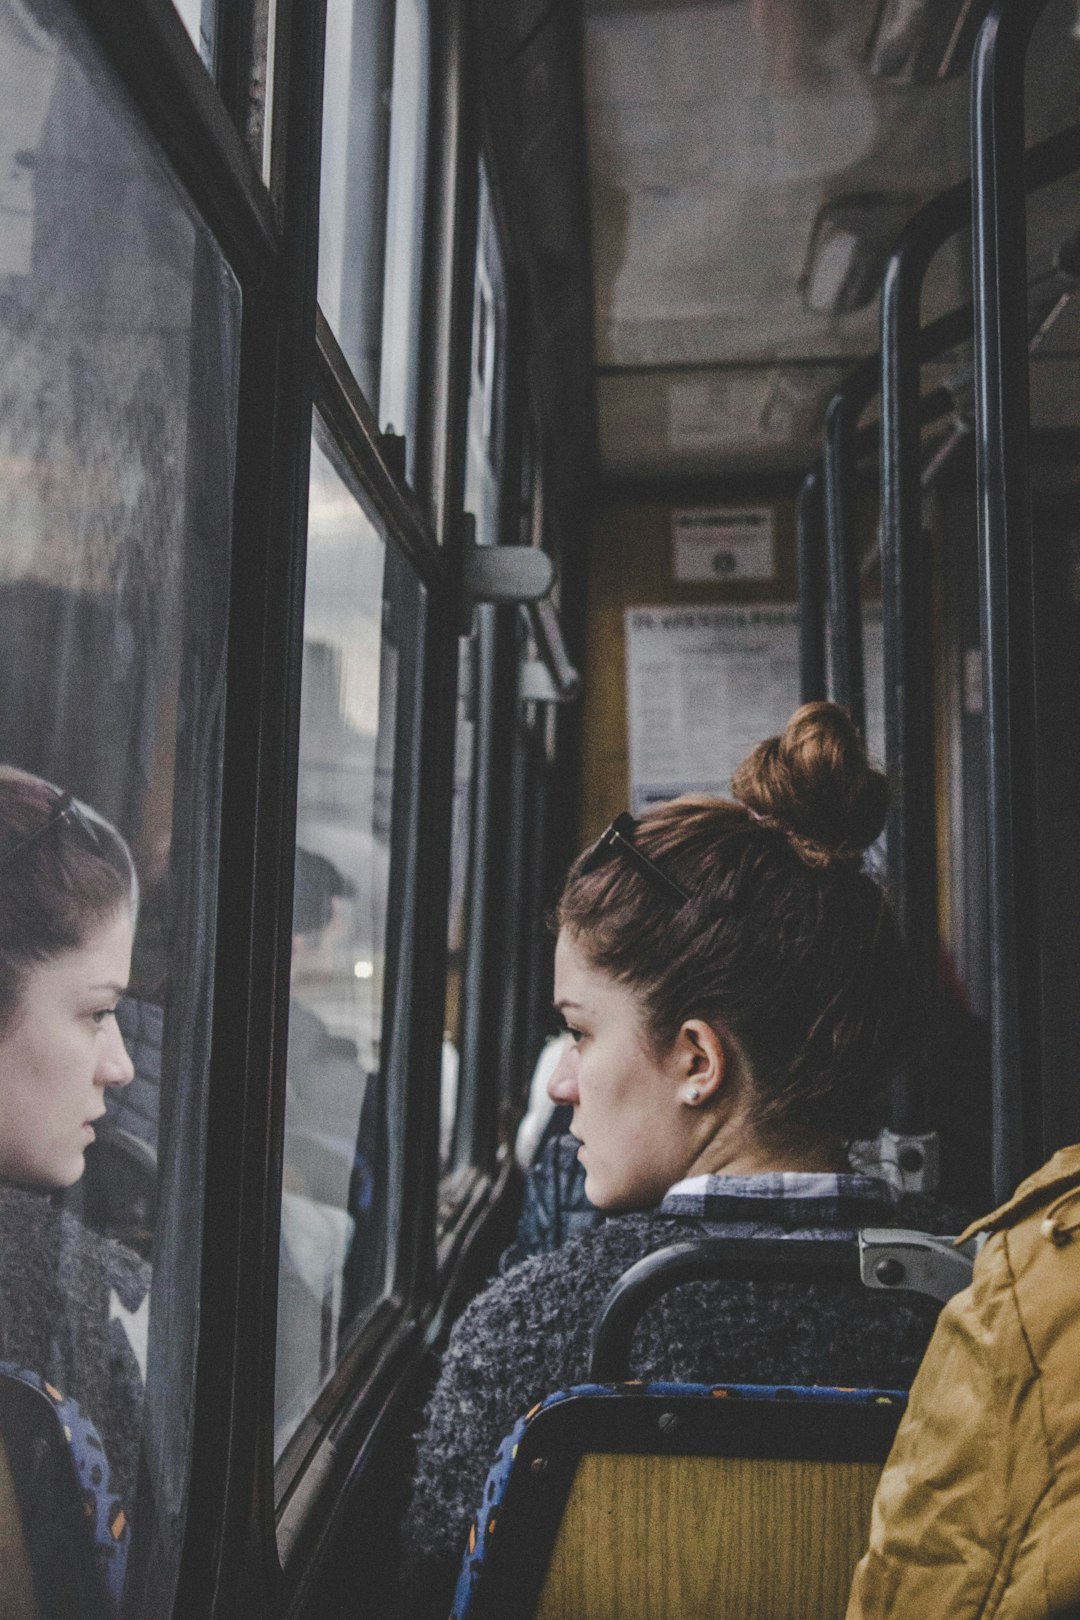 Woman looking out bus window